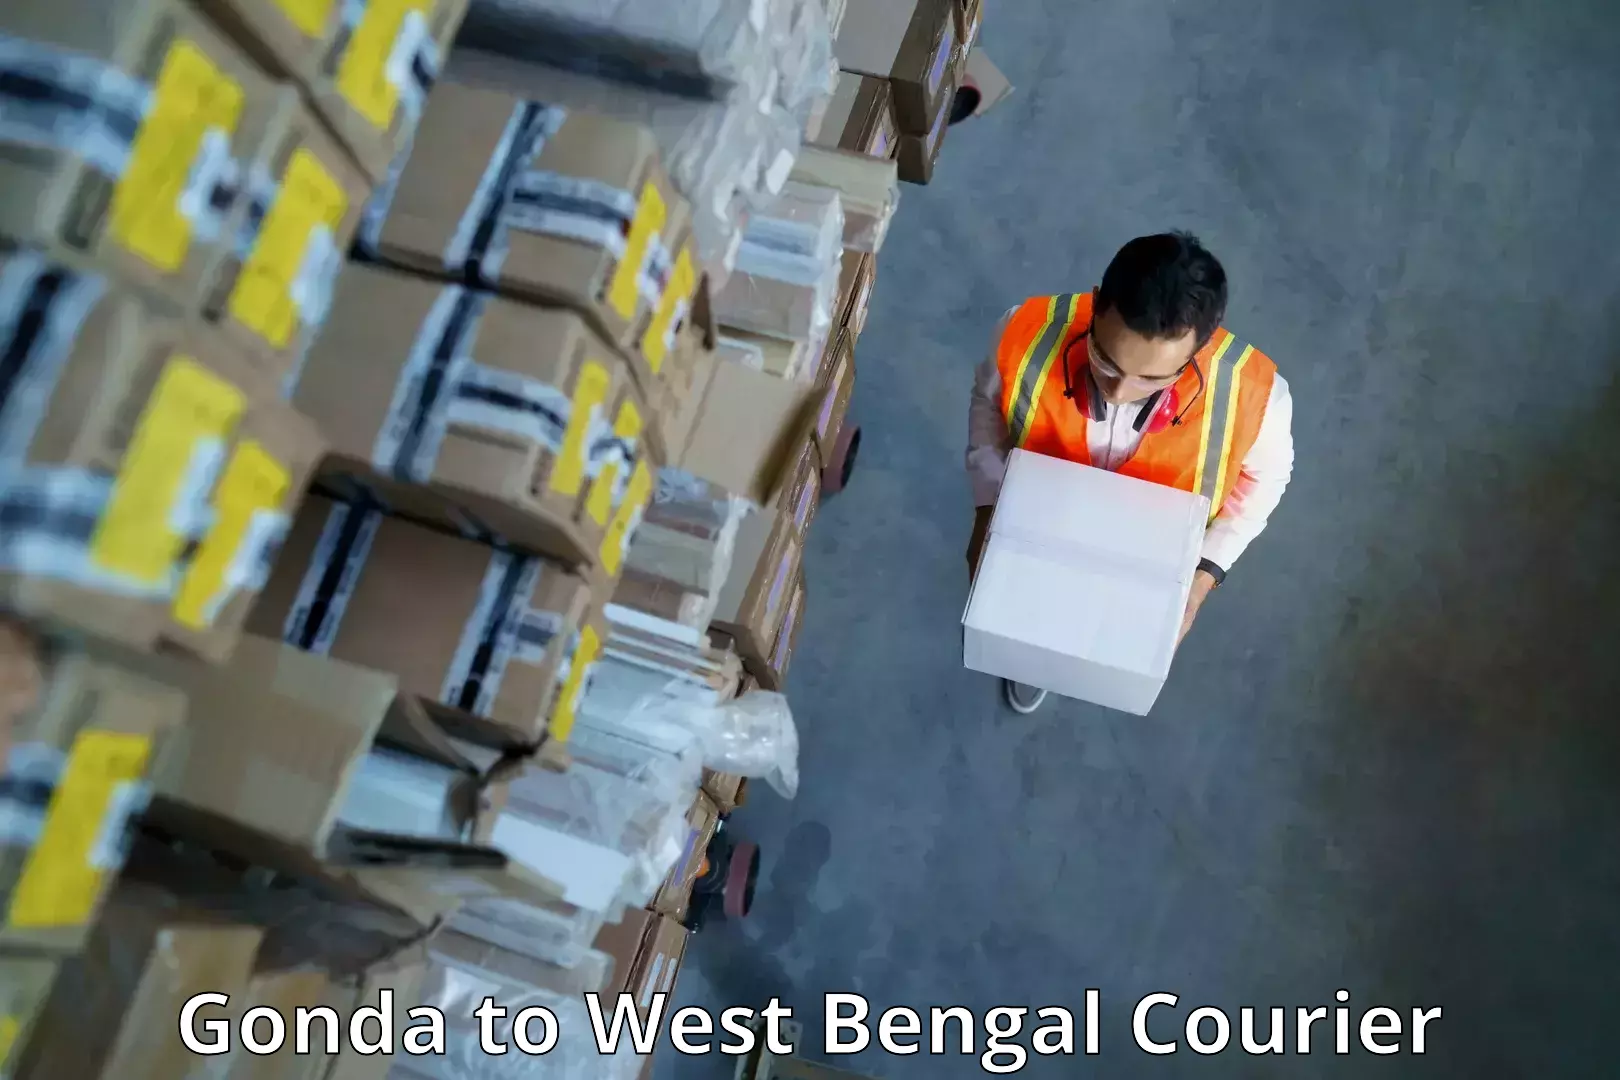 Advanced courier platforms Gonda to Islampur